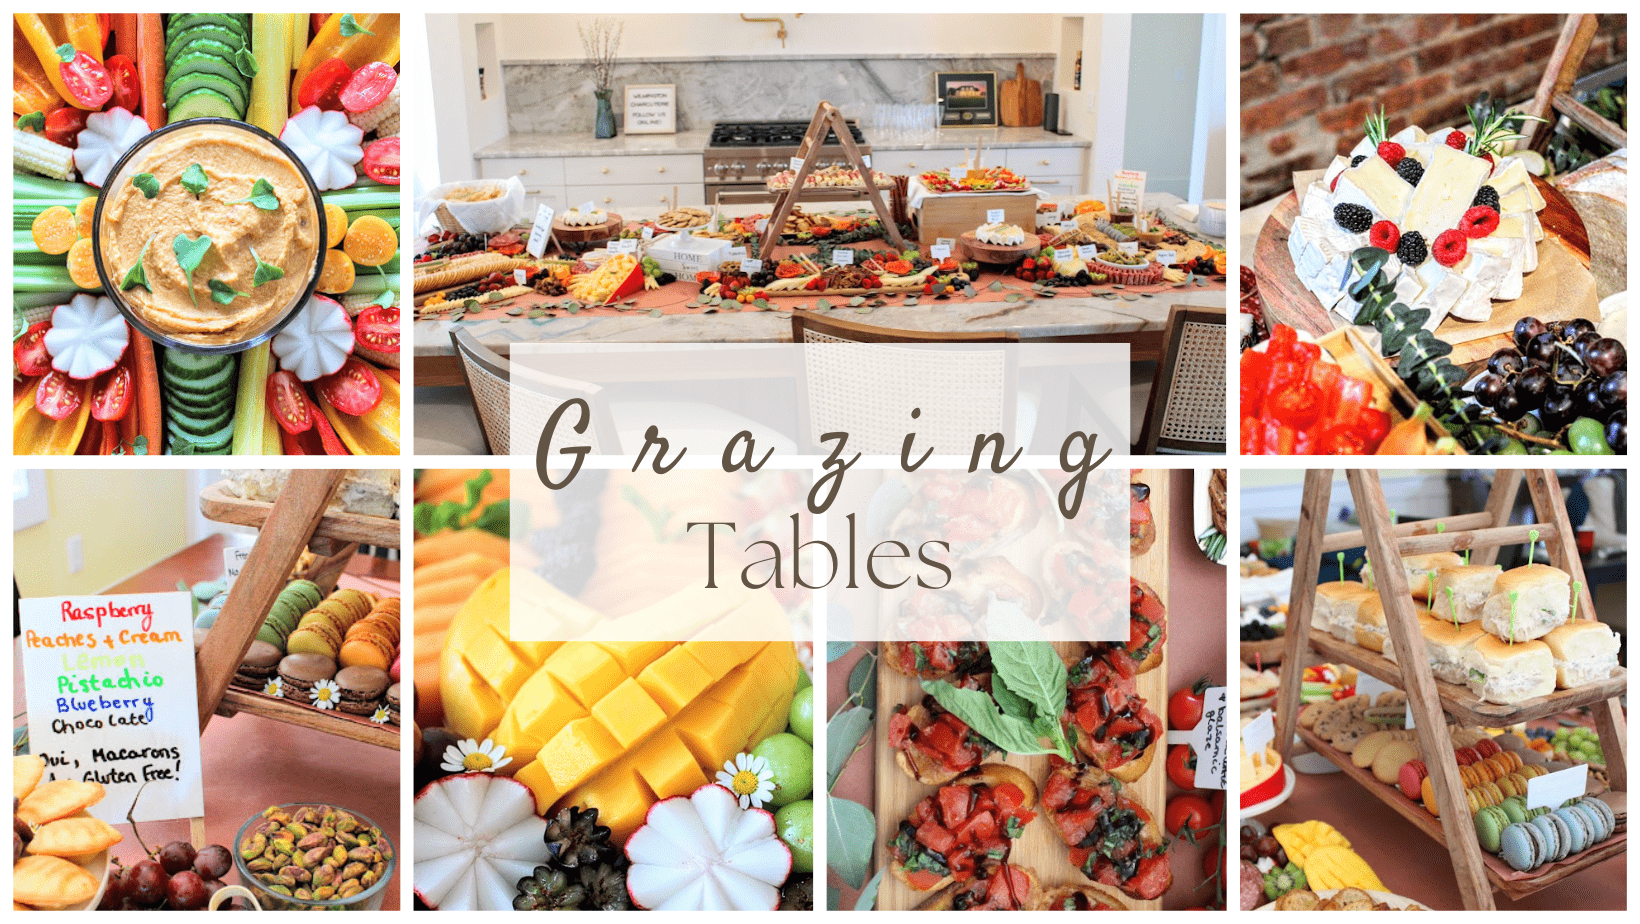 Grazing Tables - Perfect for a large crowd or reception. Wow your guests with a large, delicious spread artistically displayed across your tabletop. Create a one of a kind experience for your guests that provides mouthwatering options for everyone!